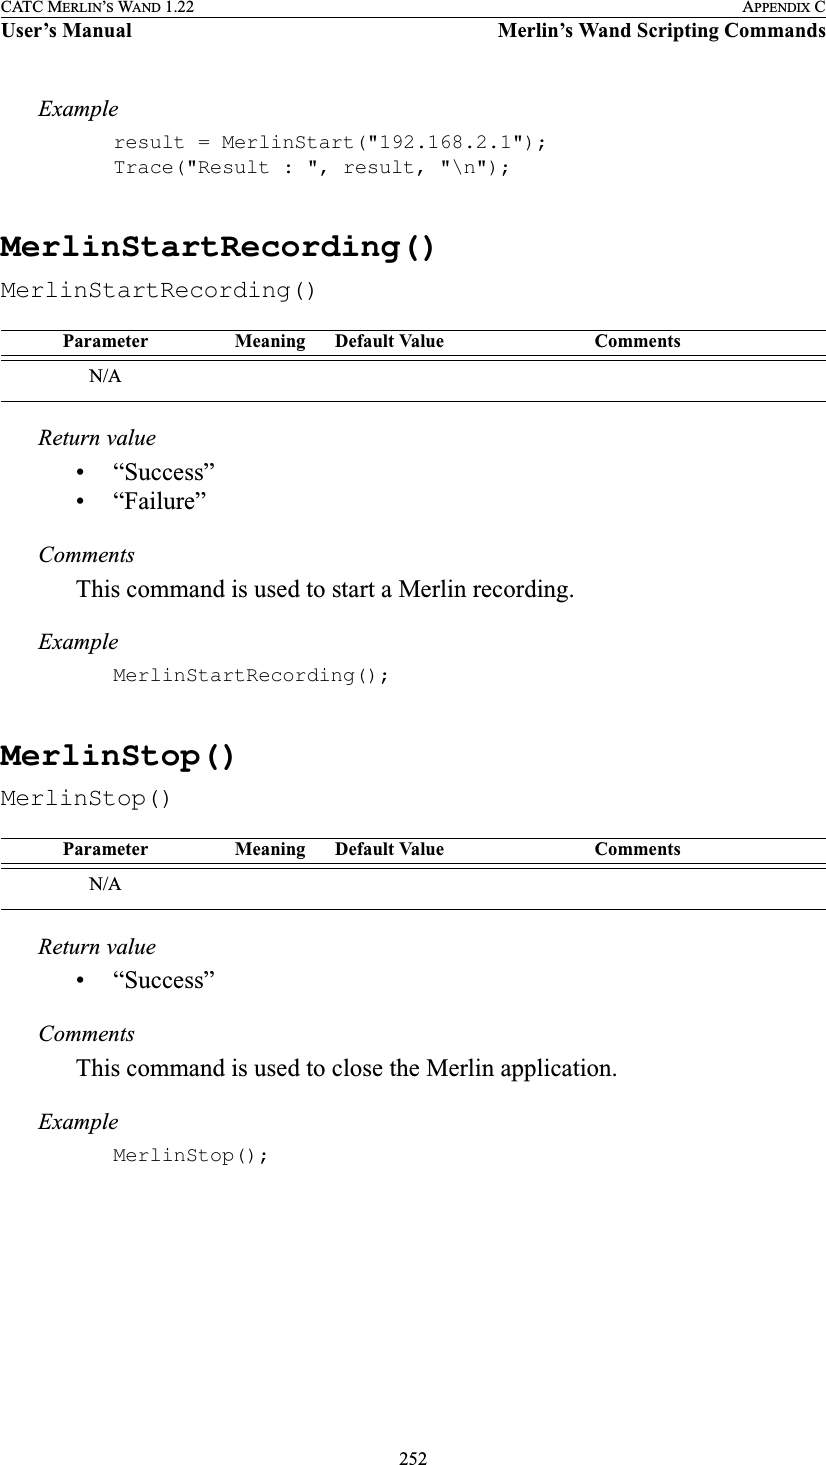 252CATC MERLIN’S WAND 1.22 APPENDIX CUser’s Manual Merlin’s Wand Scripting CommandsExampleresult = MerlinStart(&quot;192.168.2.1&quot;);Trace(&quot;Result : &quot;, result, &quot;\n&quot;);MerlinStartRecording()MerlinStartRecording()Return value• “Success”• “Failure”CommentsThis command is used to start a Merlin recording.ExampleMerlinStartRecording();MerlinStop()MerlinStop()Return value• “Success”CommentsThis command is used to close the Merlin application.ExampleMerlinStop();Parameter Meaning Default Value CommentsN/AParameter Meaning Default Value CommentsN/A